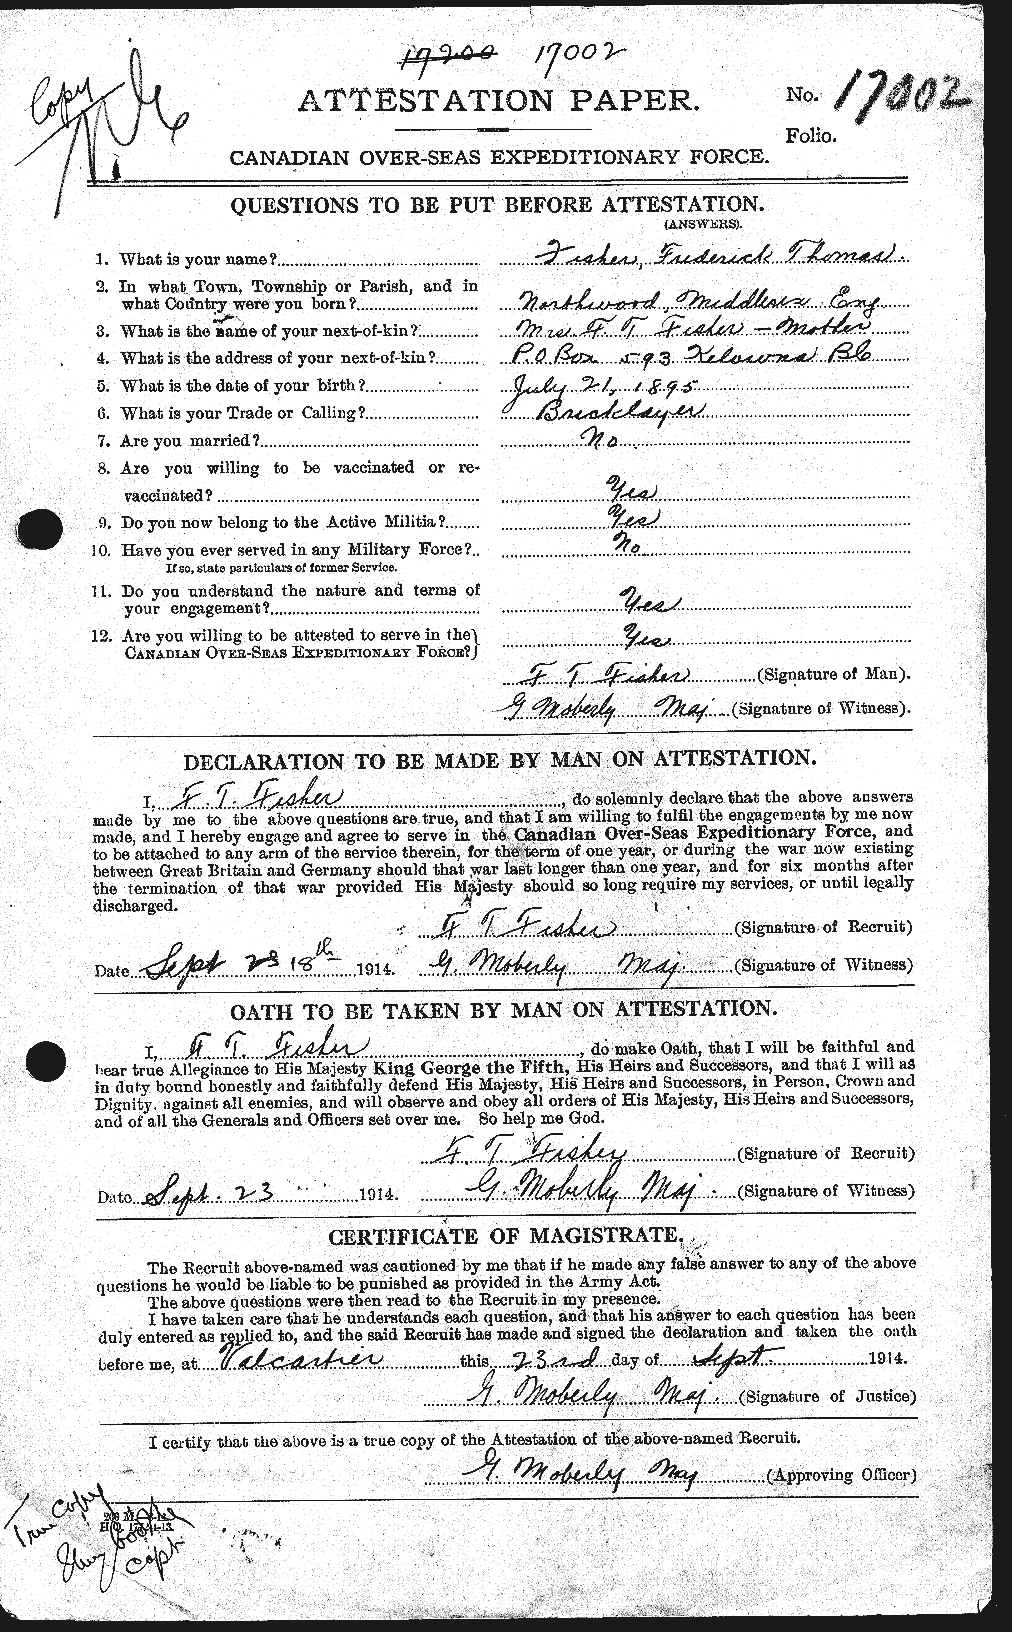 Personnel Records of the First World War - CEF 325905a